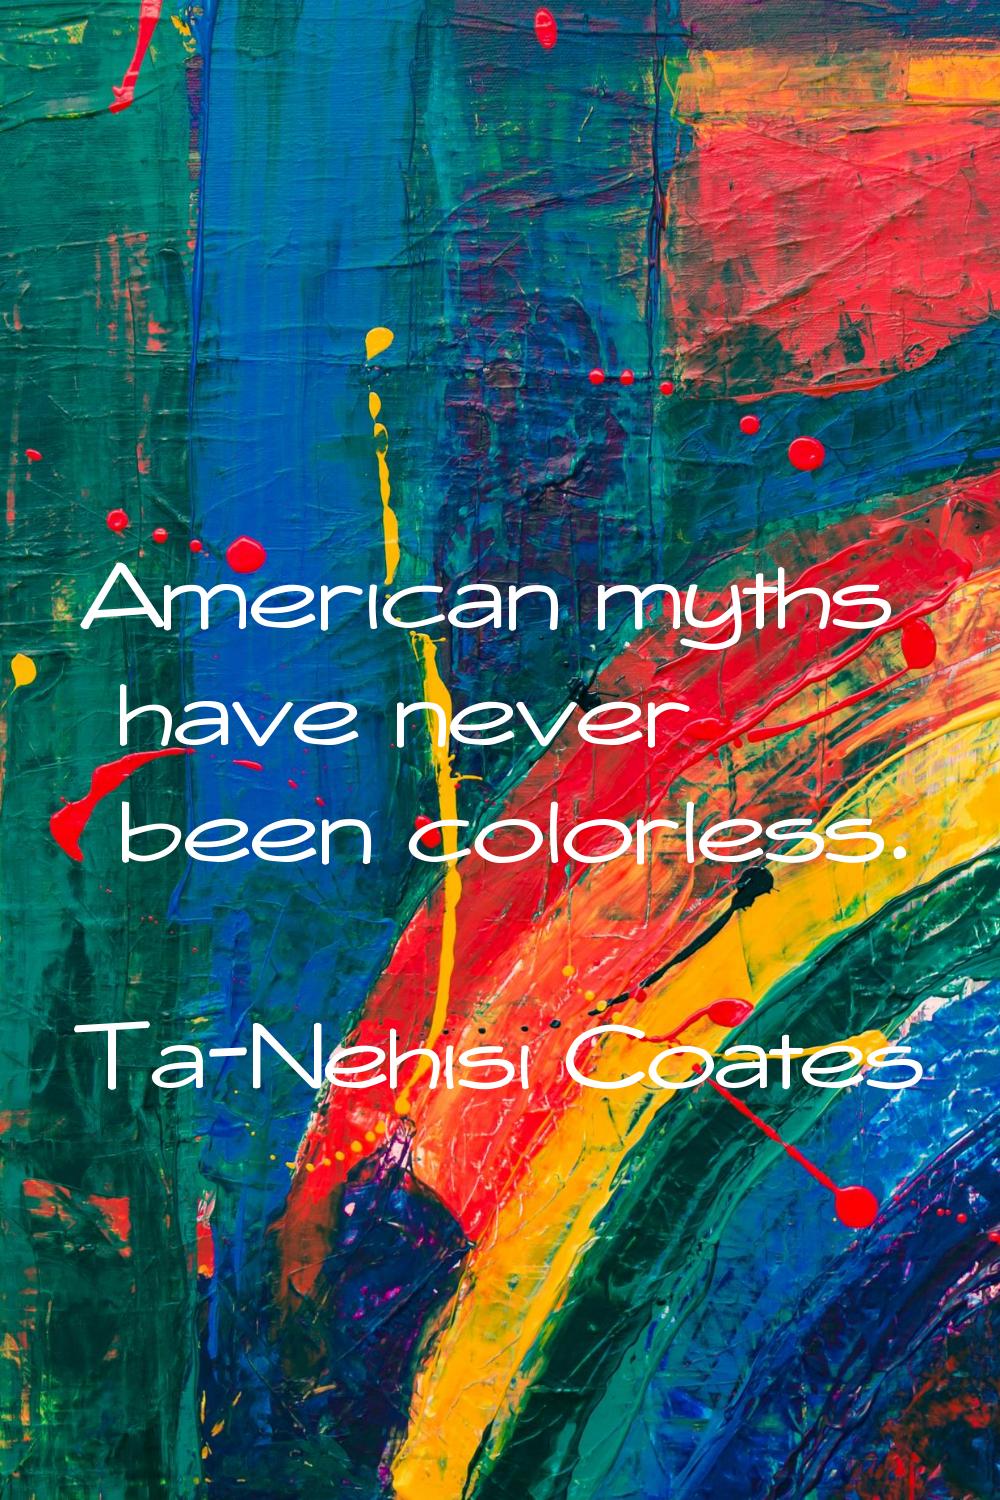 American myths have never been colorless.